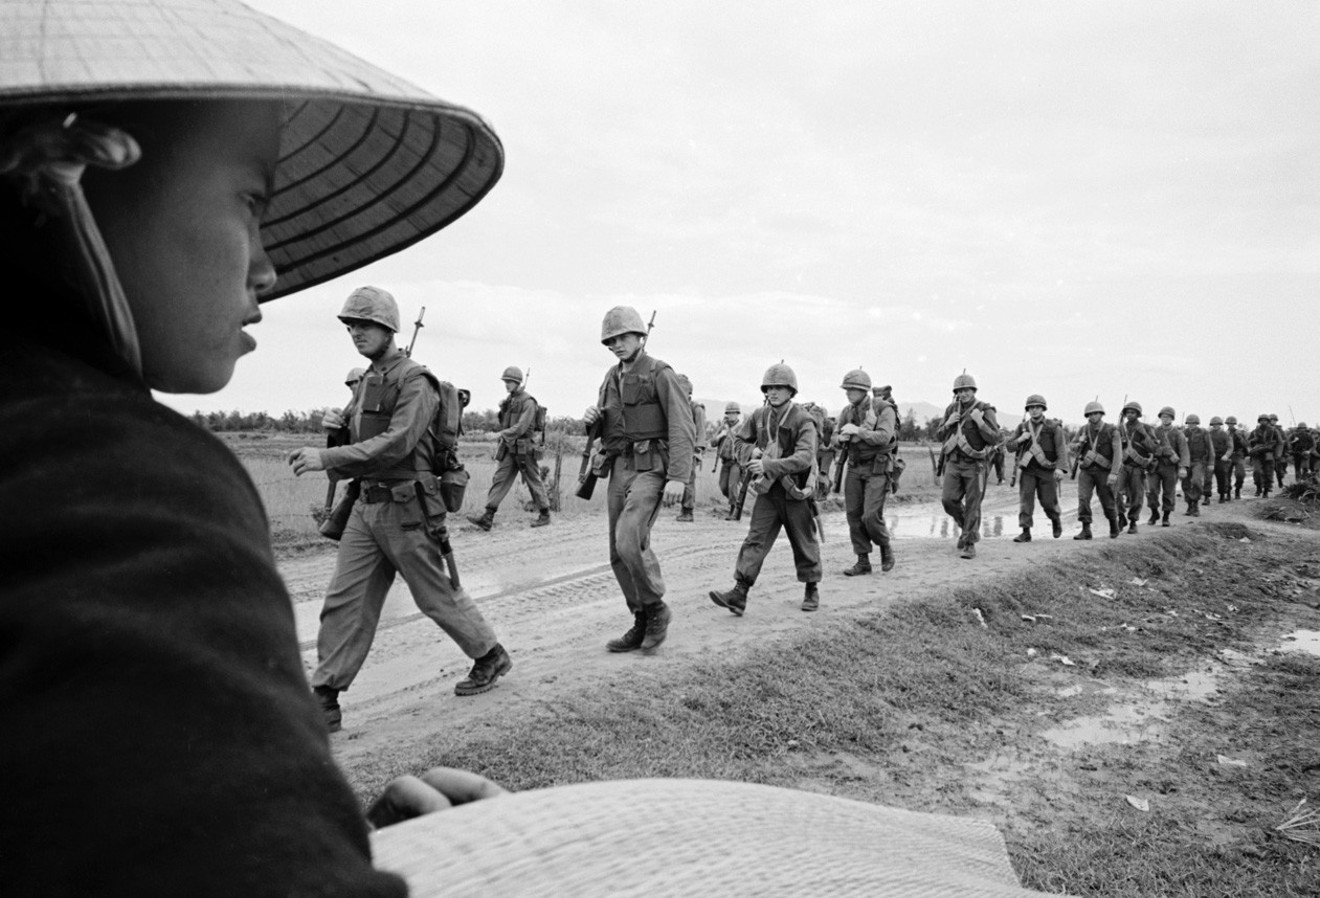 U.S. Marines, marching in Danang in March 1965, were among the subjects of The Vietnam War, an 18-hour, 10-part documentary by Ken Burns and Lynn Novick.